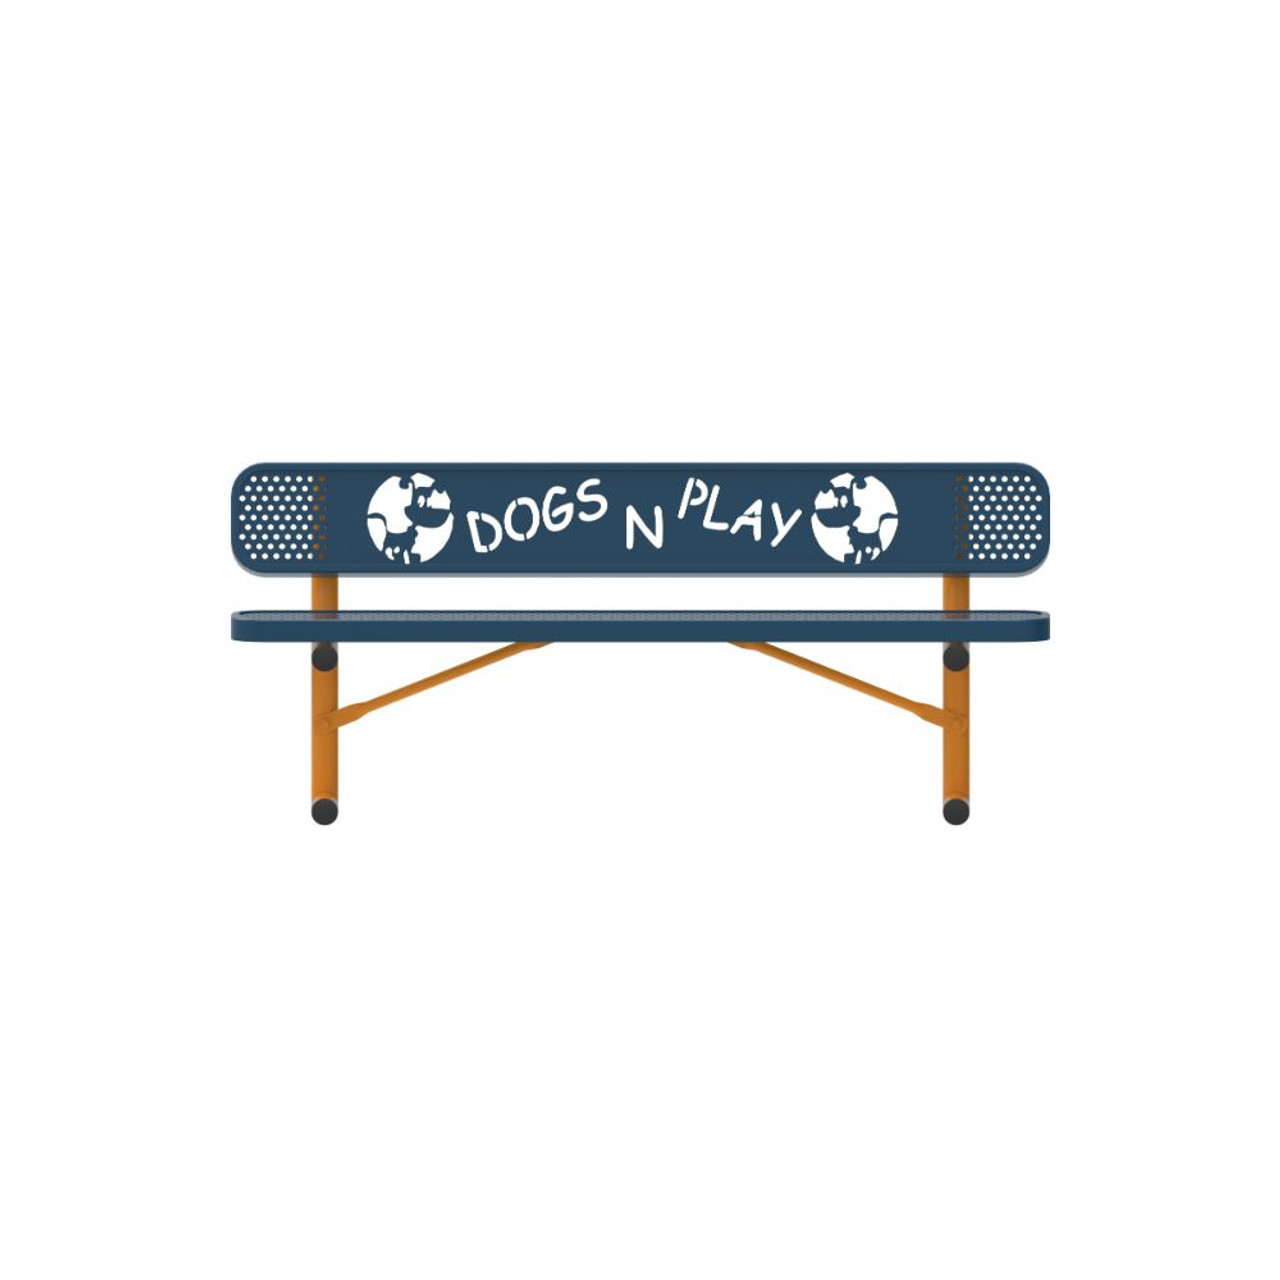 6' Dog Themed Bench - Punched Steel - Portable - light blue